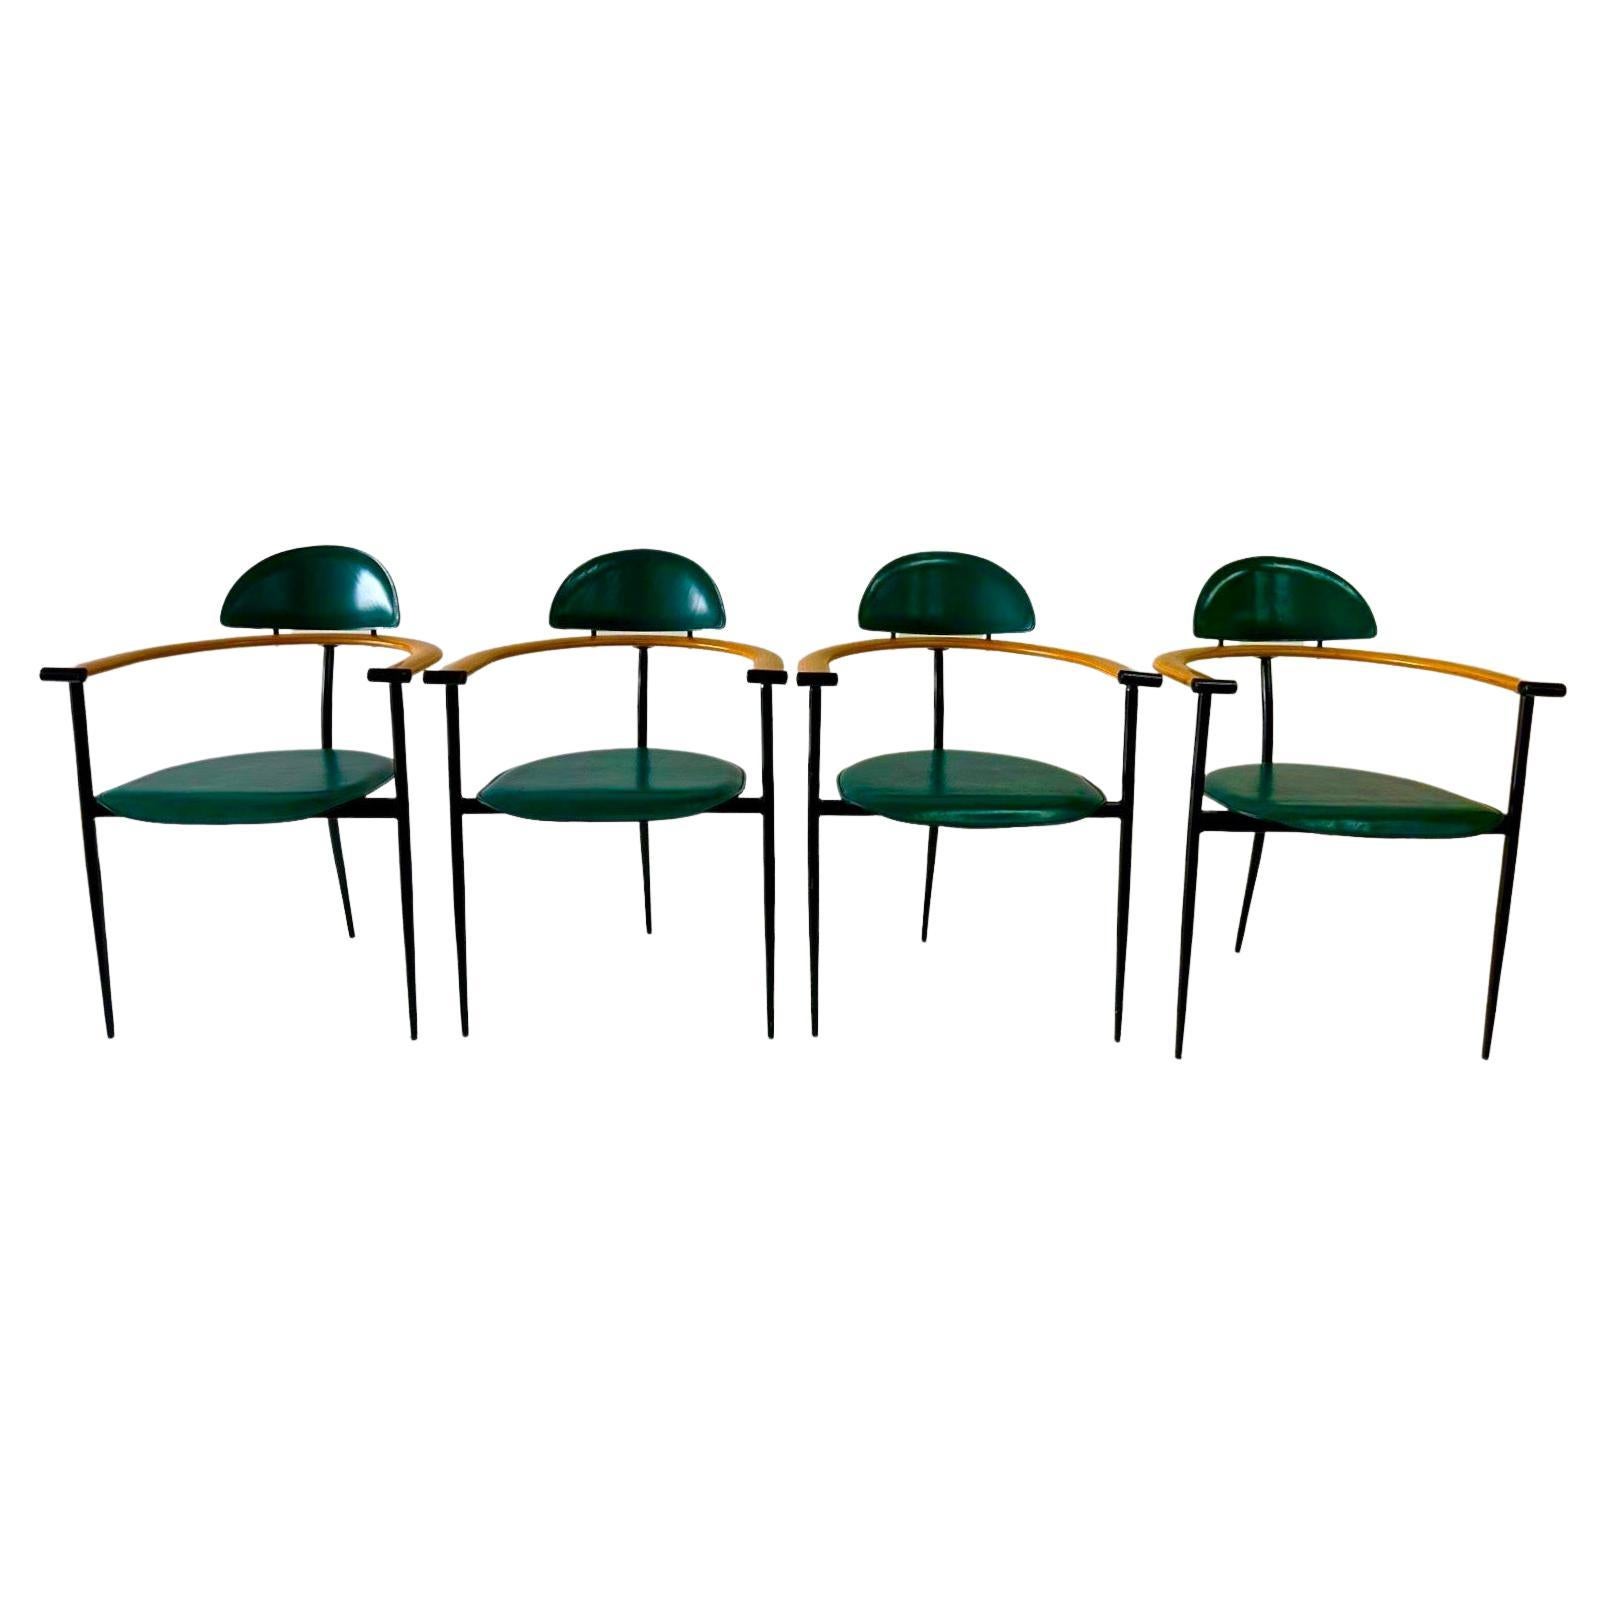 Set of Four Green Stitched Leather Stiletto Chairs by Arrben ITALY